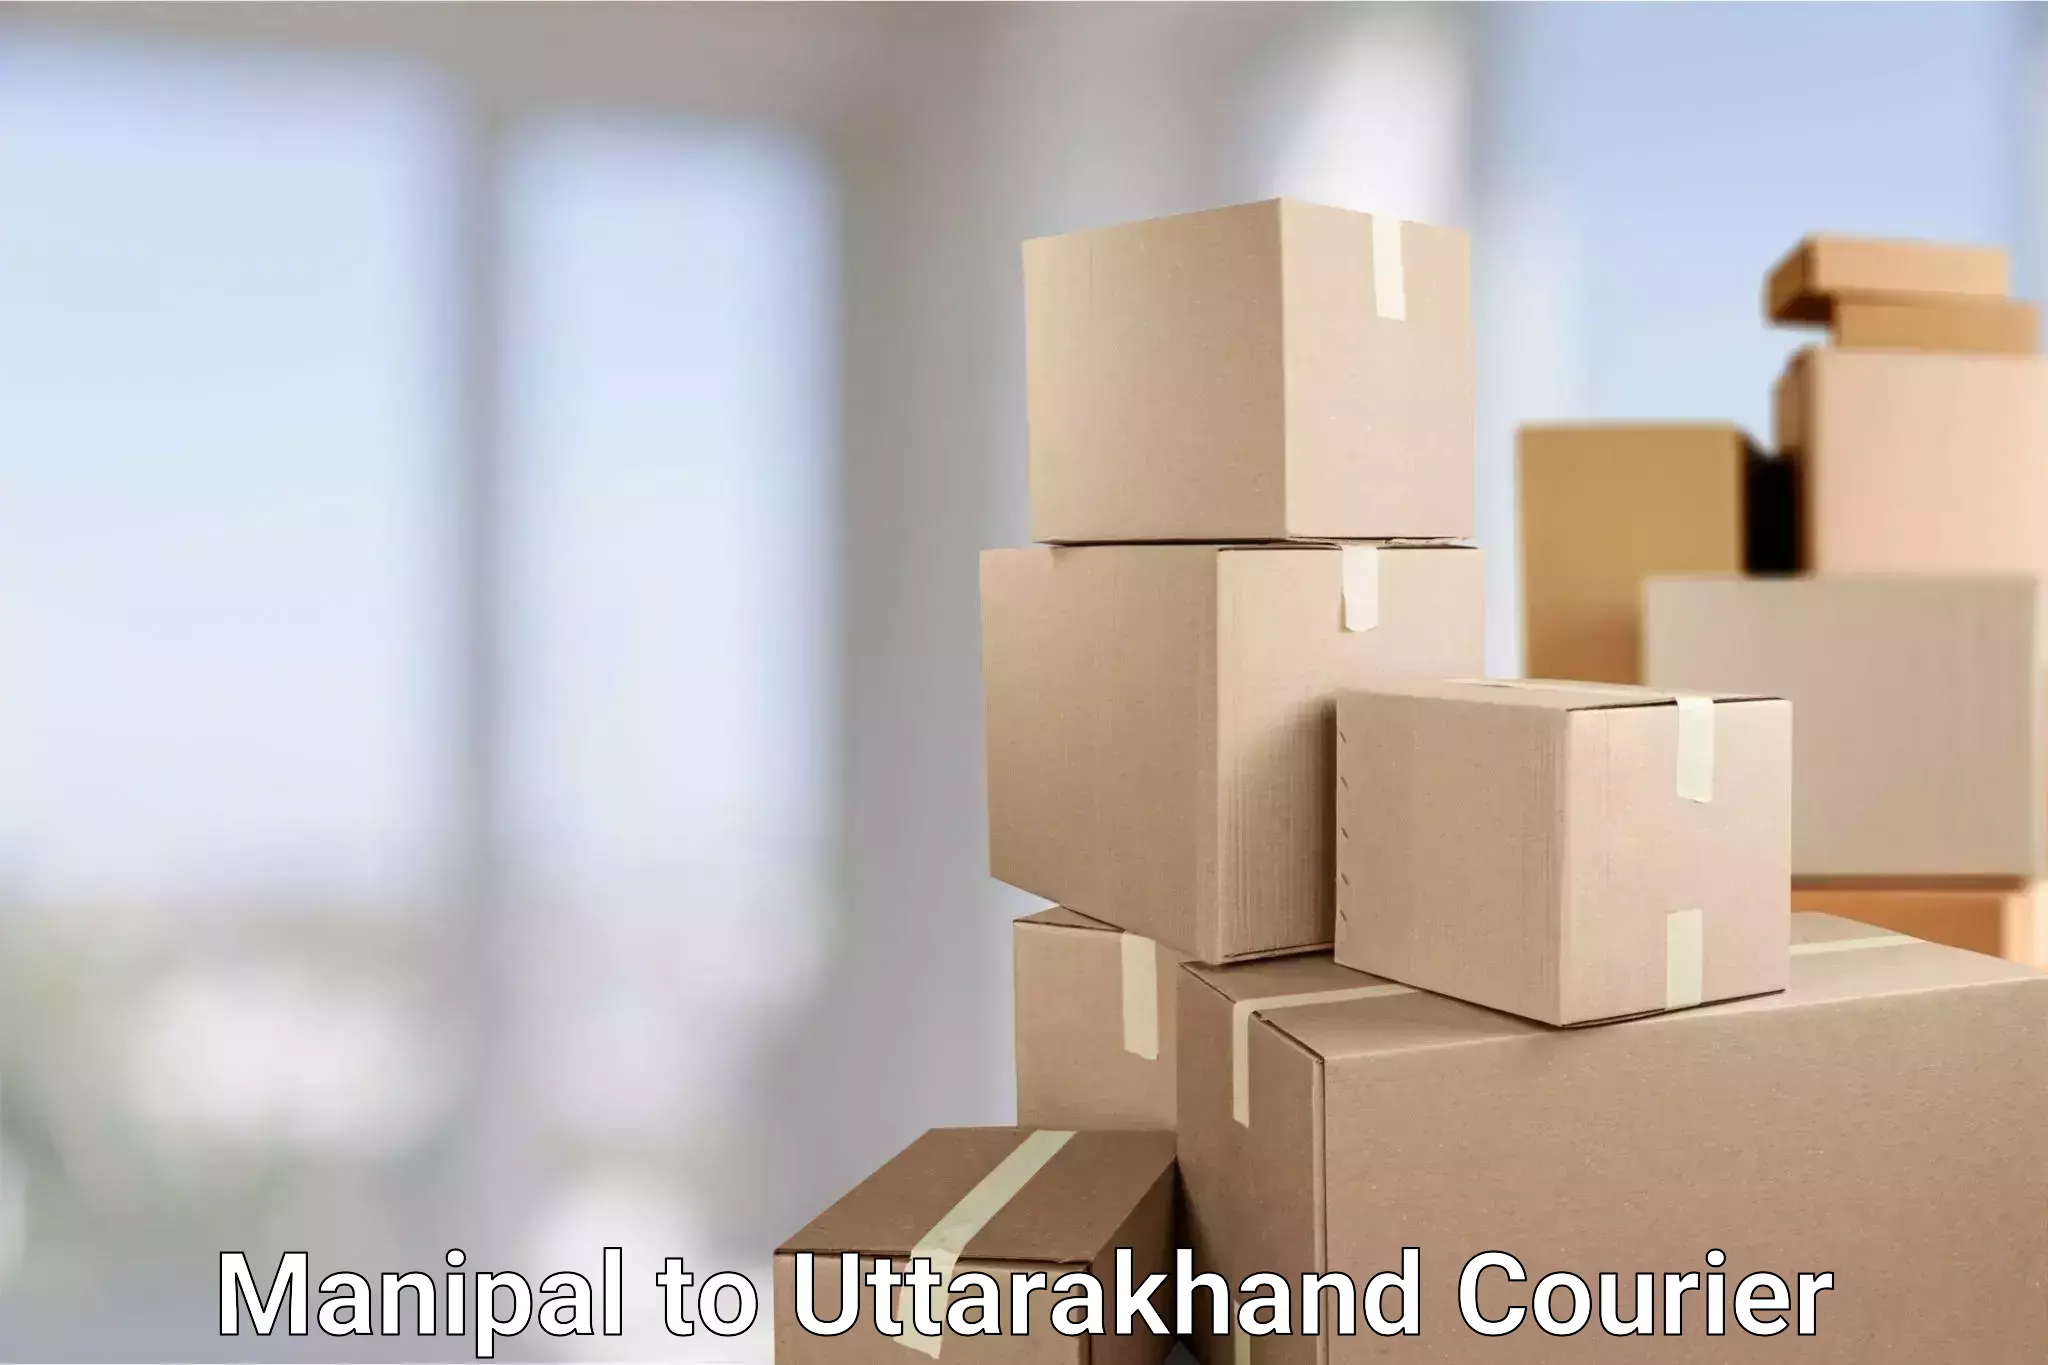 Global logistics network Manipal to Rudrapur